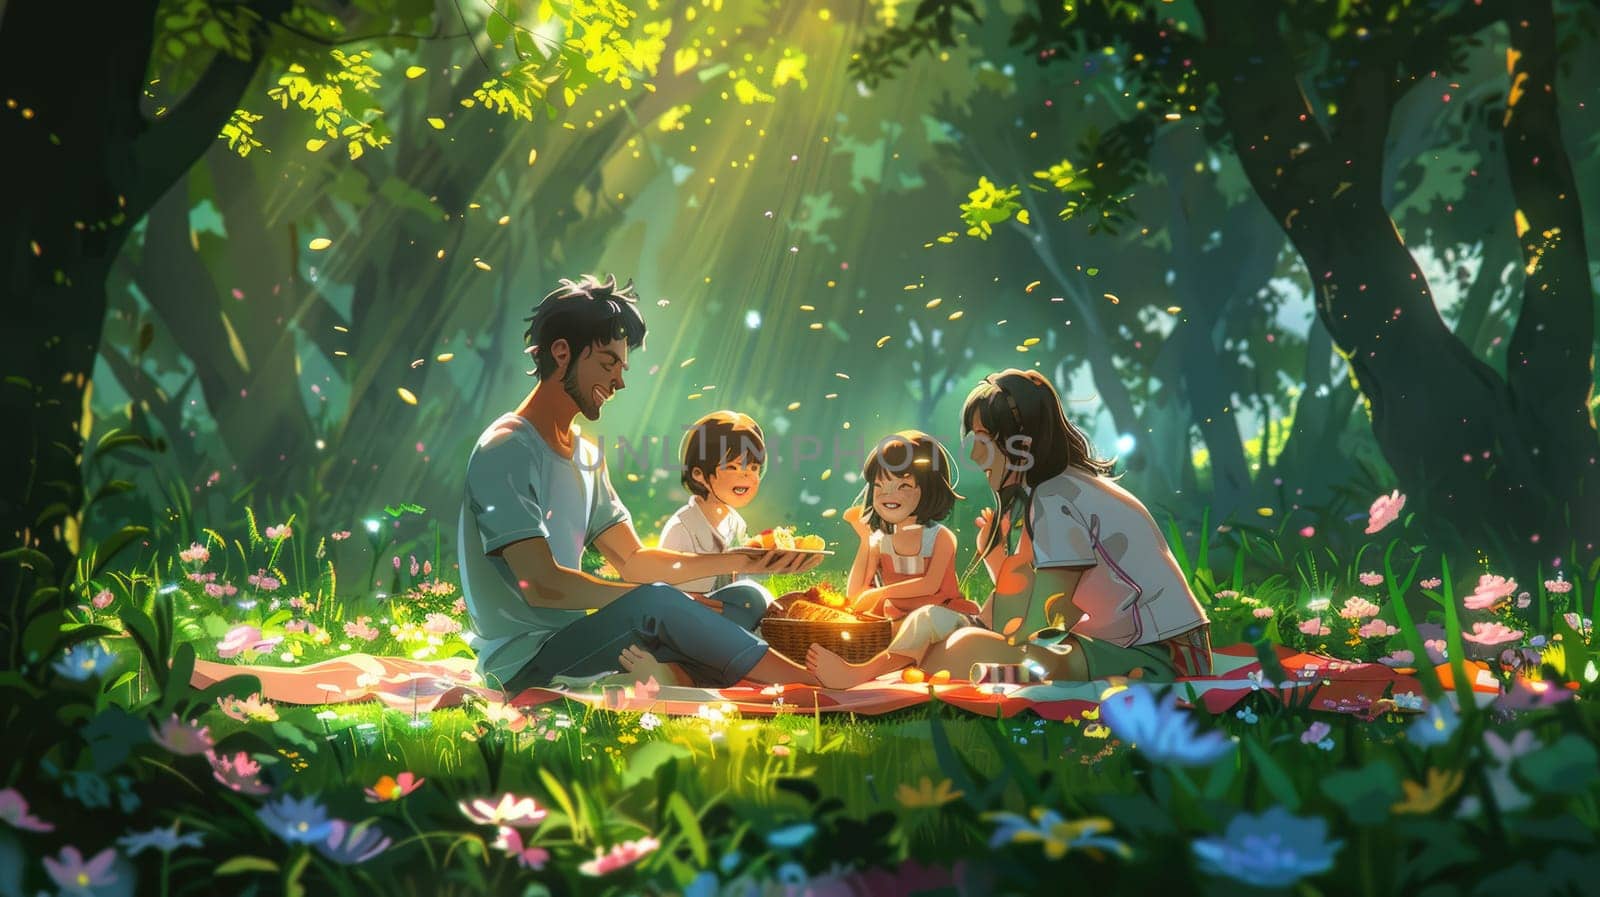 A family having a picnic in a lush park, with parents and children laughing and sharing food on a colorful blanket, surrounded by blooming flowers and green trees. by nijieimu